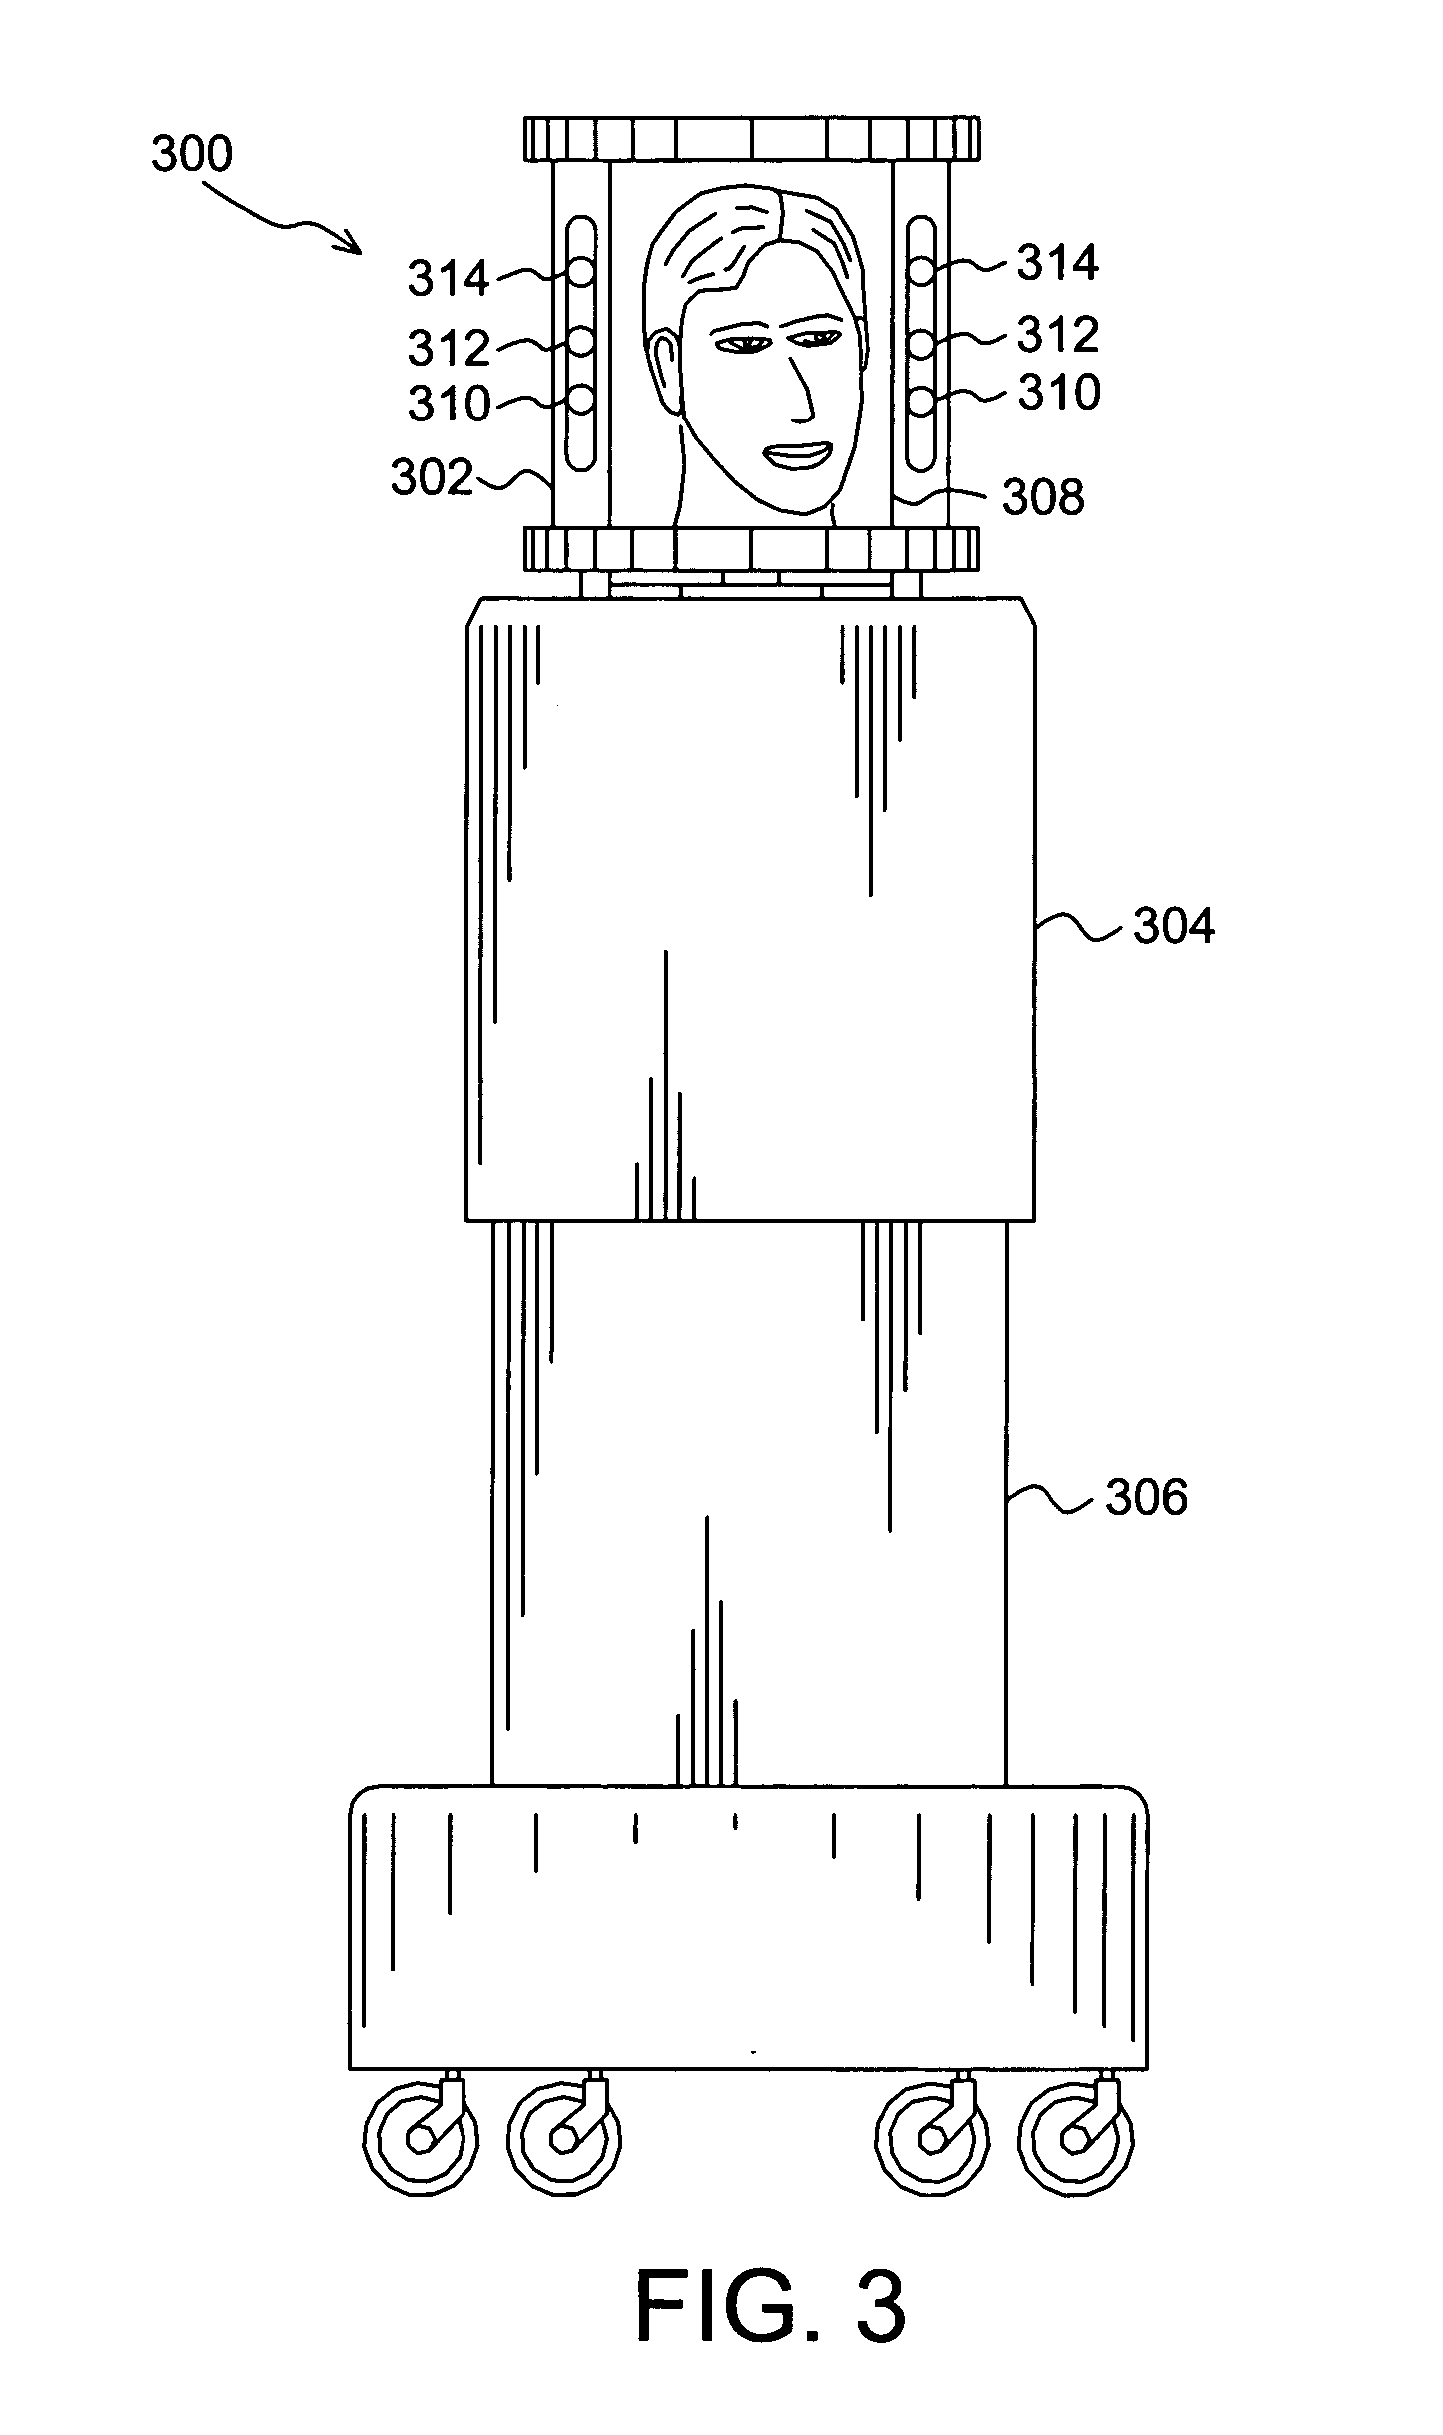 System and method for control of video bandwidth based on pose of a person